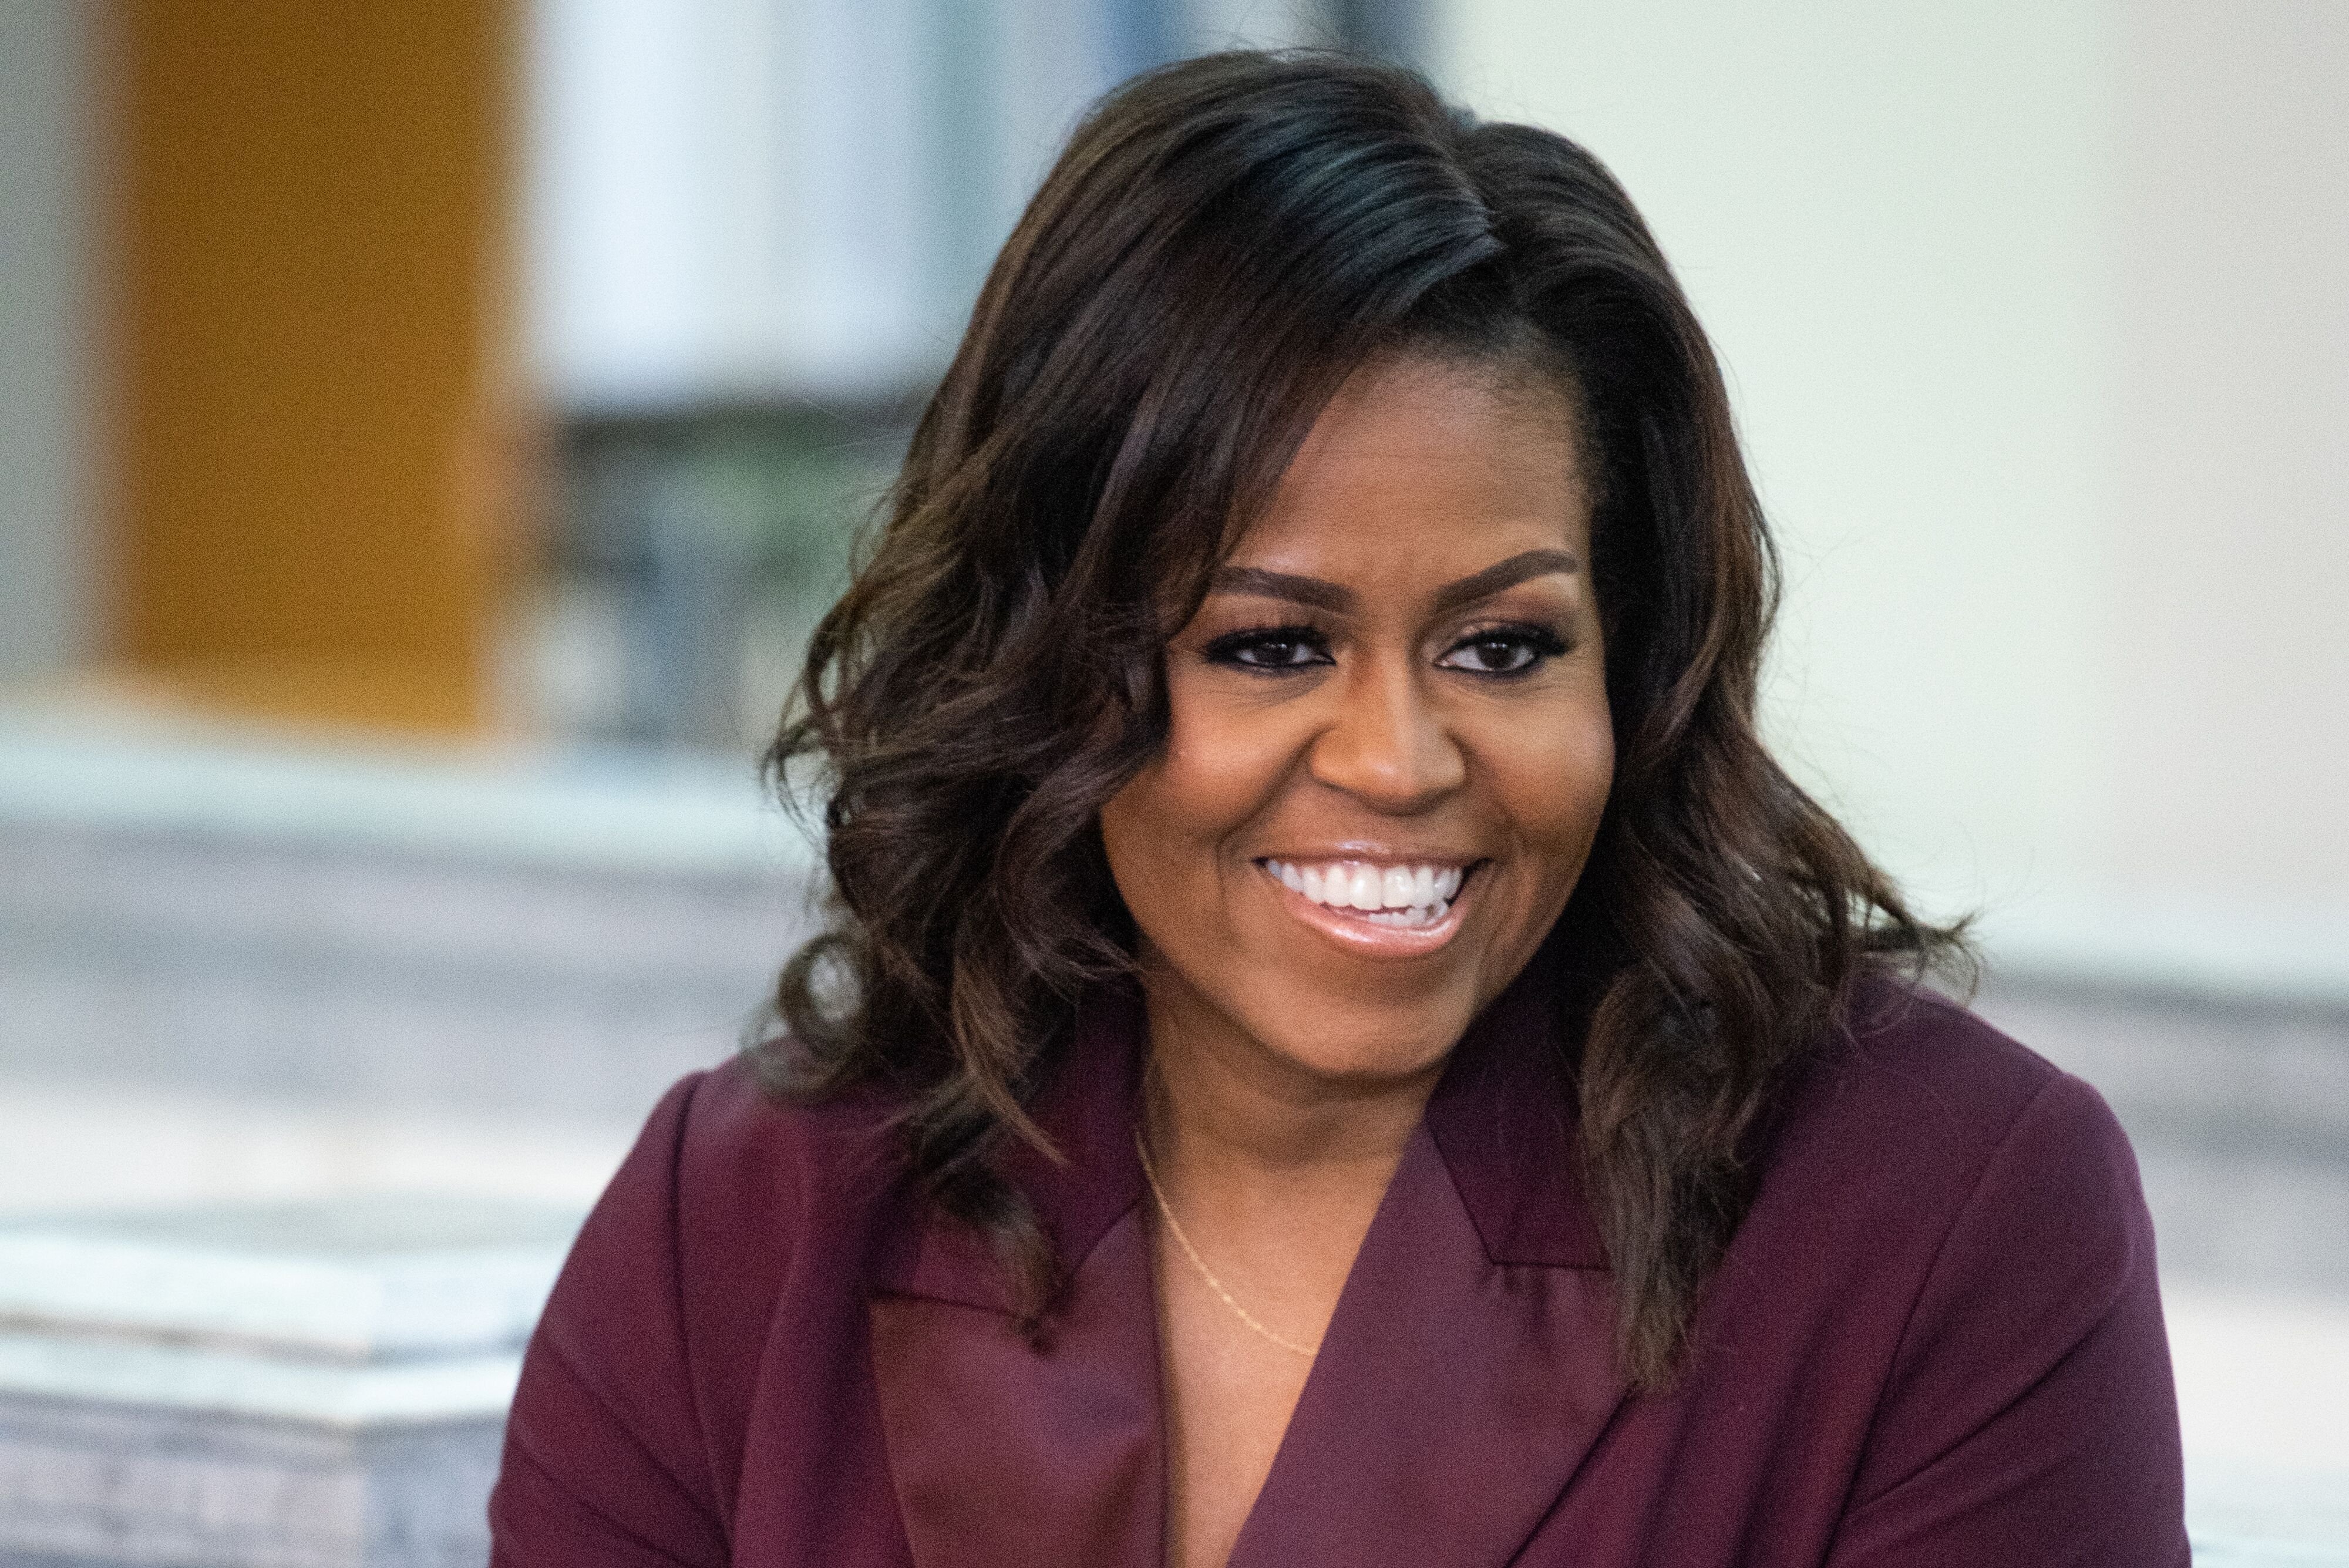 Michelle Obama promoting her book, "Becoming" in Tacoma, Washington in March 2019. | Photo: Getty Images